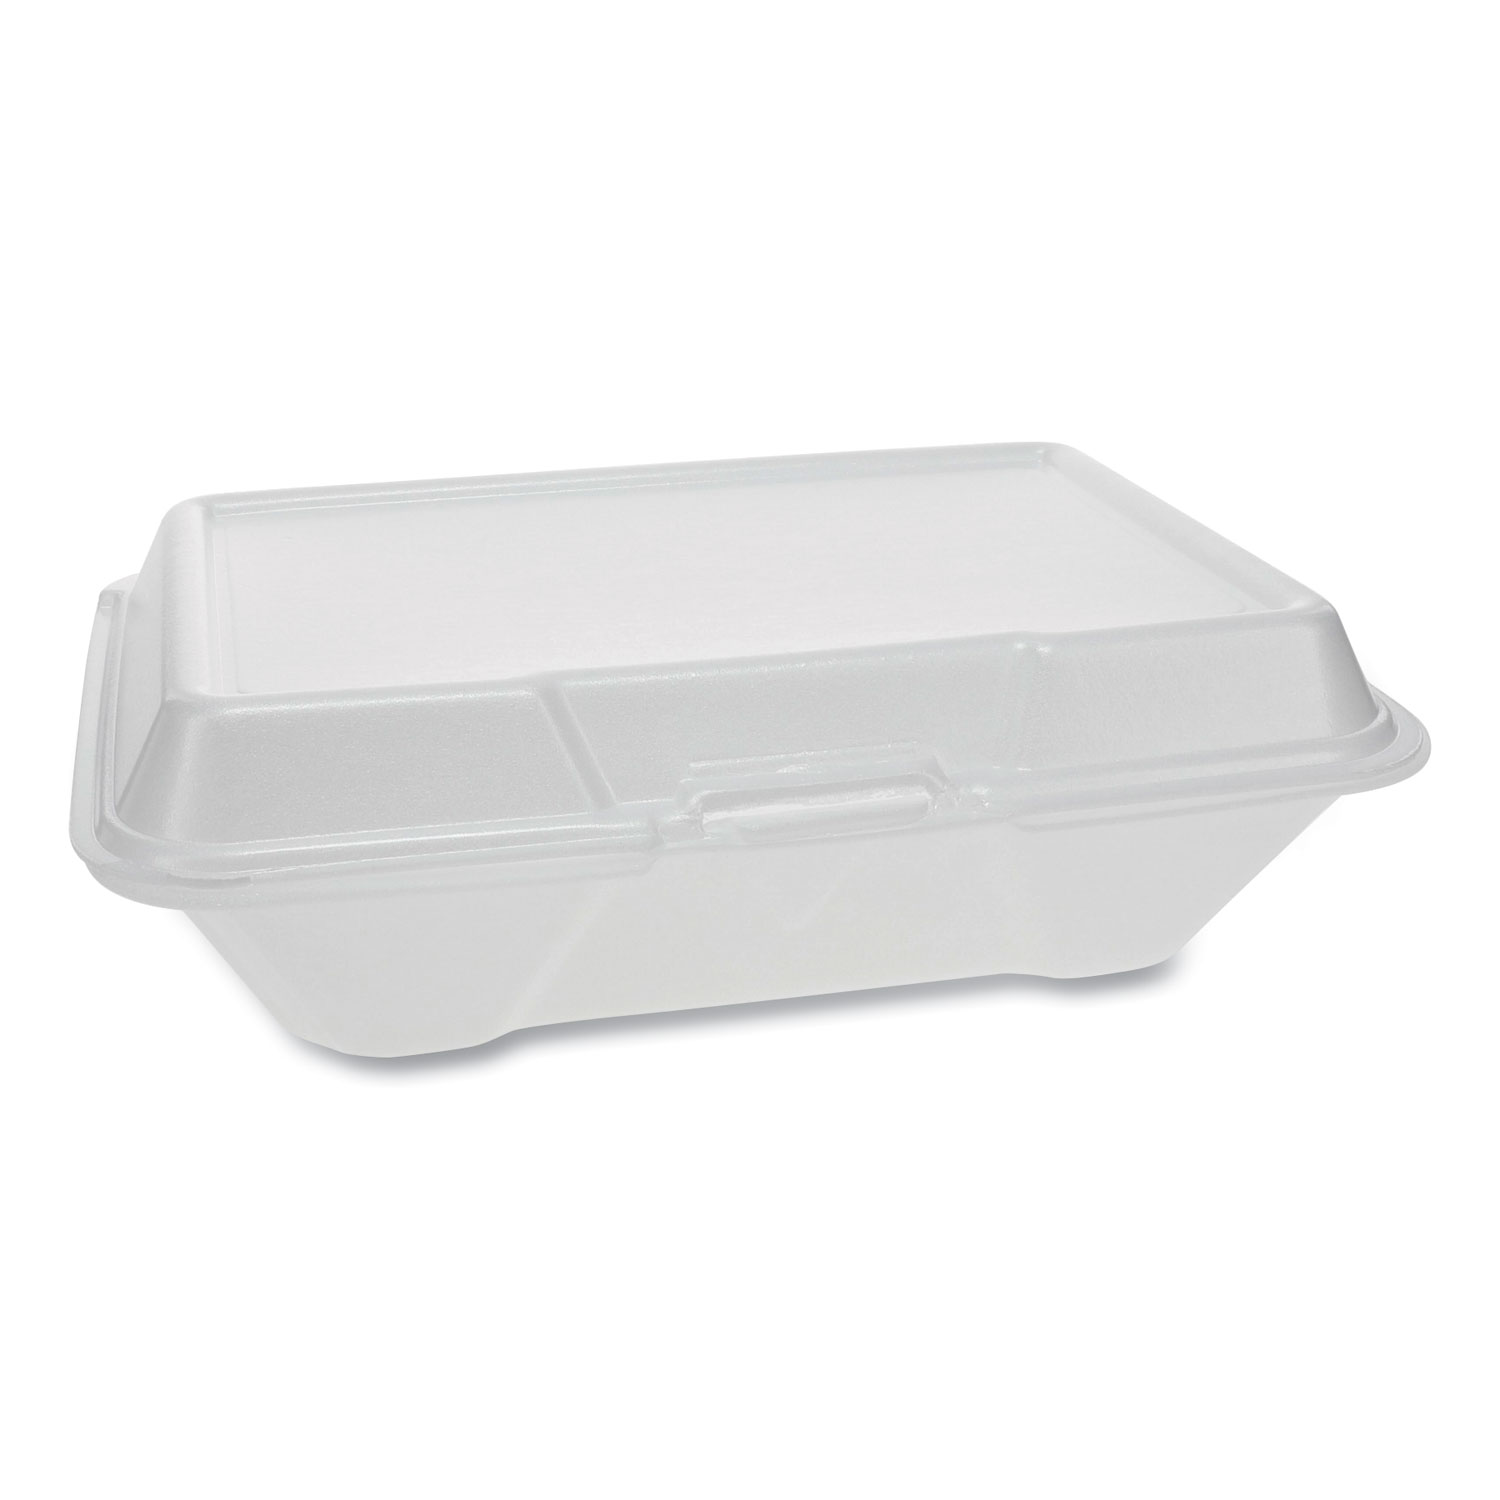  Pactiv YTH102050001 Foam Hinged Lid Containers, Single Tab Lock #205 Utility, 9.19 x 6.5 x 2.75, 1-Compartment, White, 150/Carton (PCTYTH102050001) 